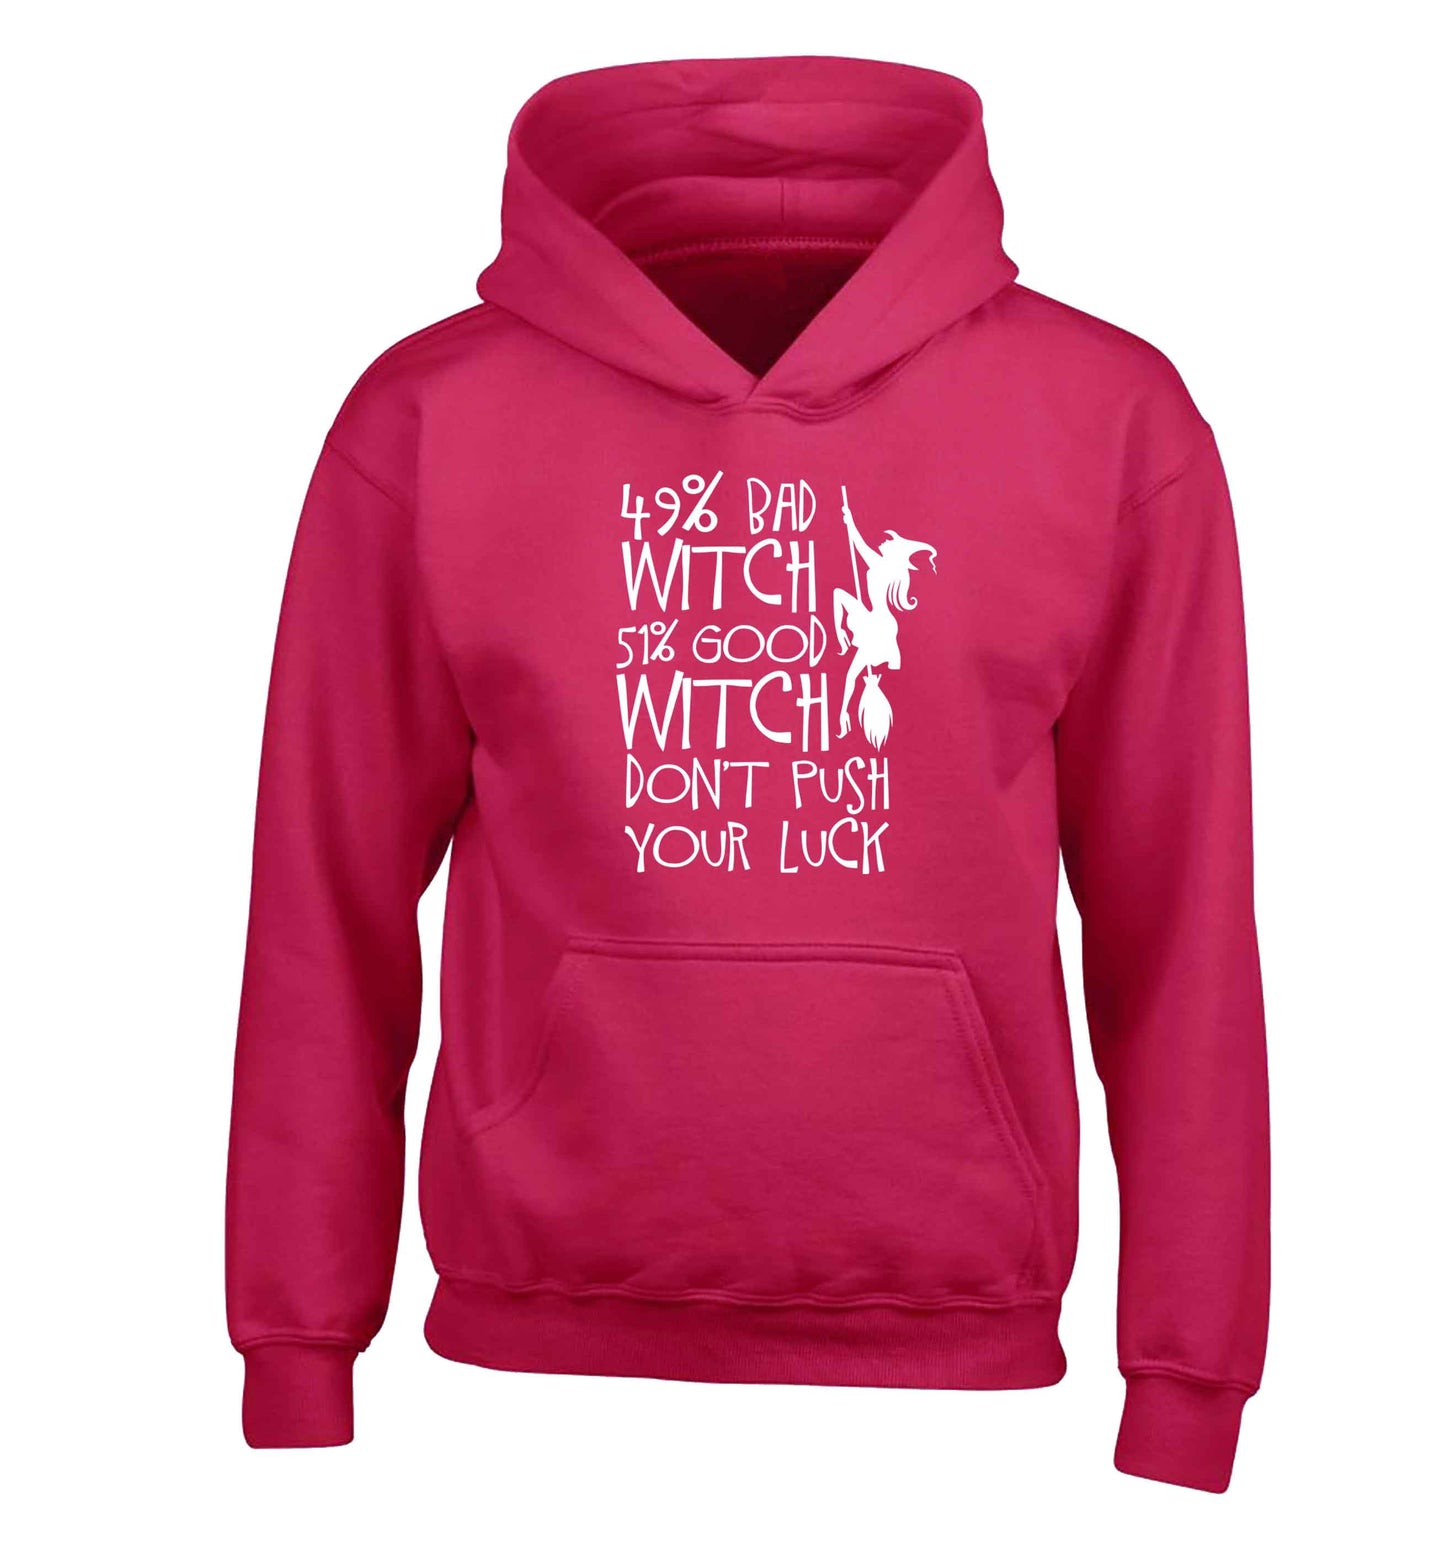 49% bad witch 51% good witch don't push your luck children's pink hoodie 12-13 Years